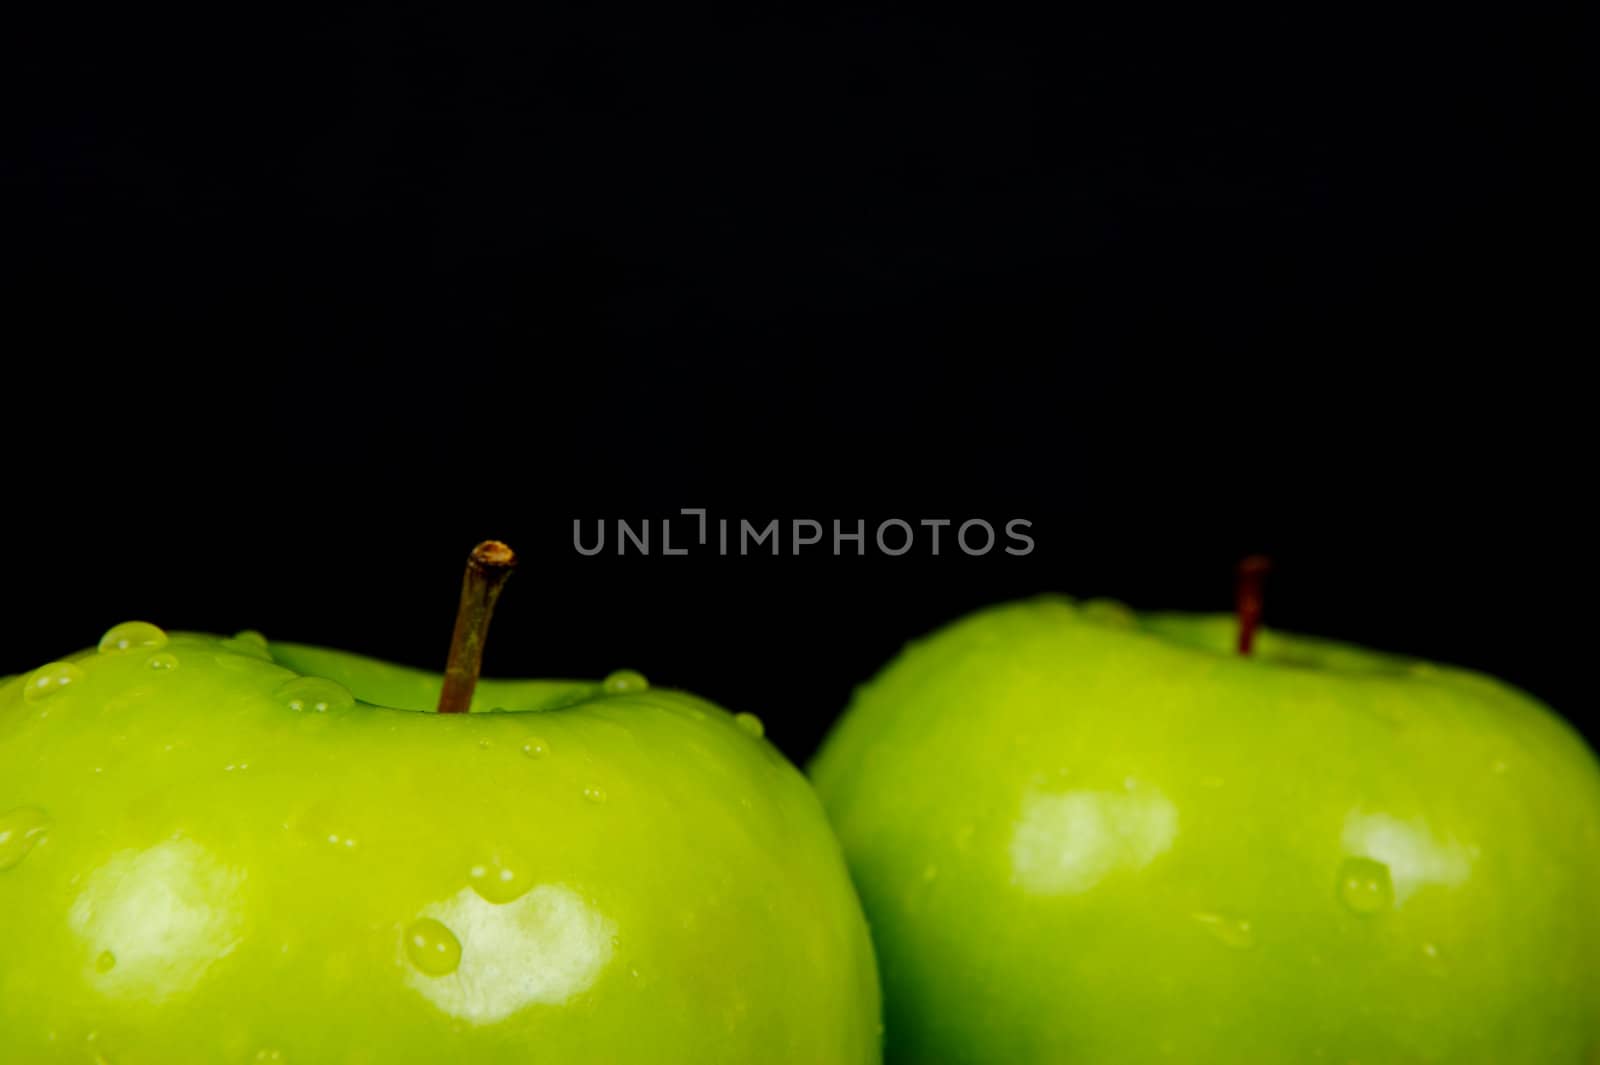 Green Apples isolated against a black background